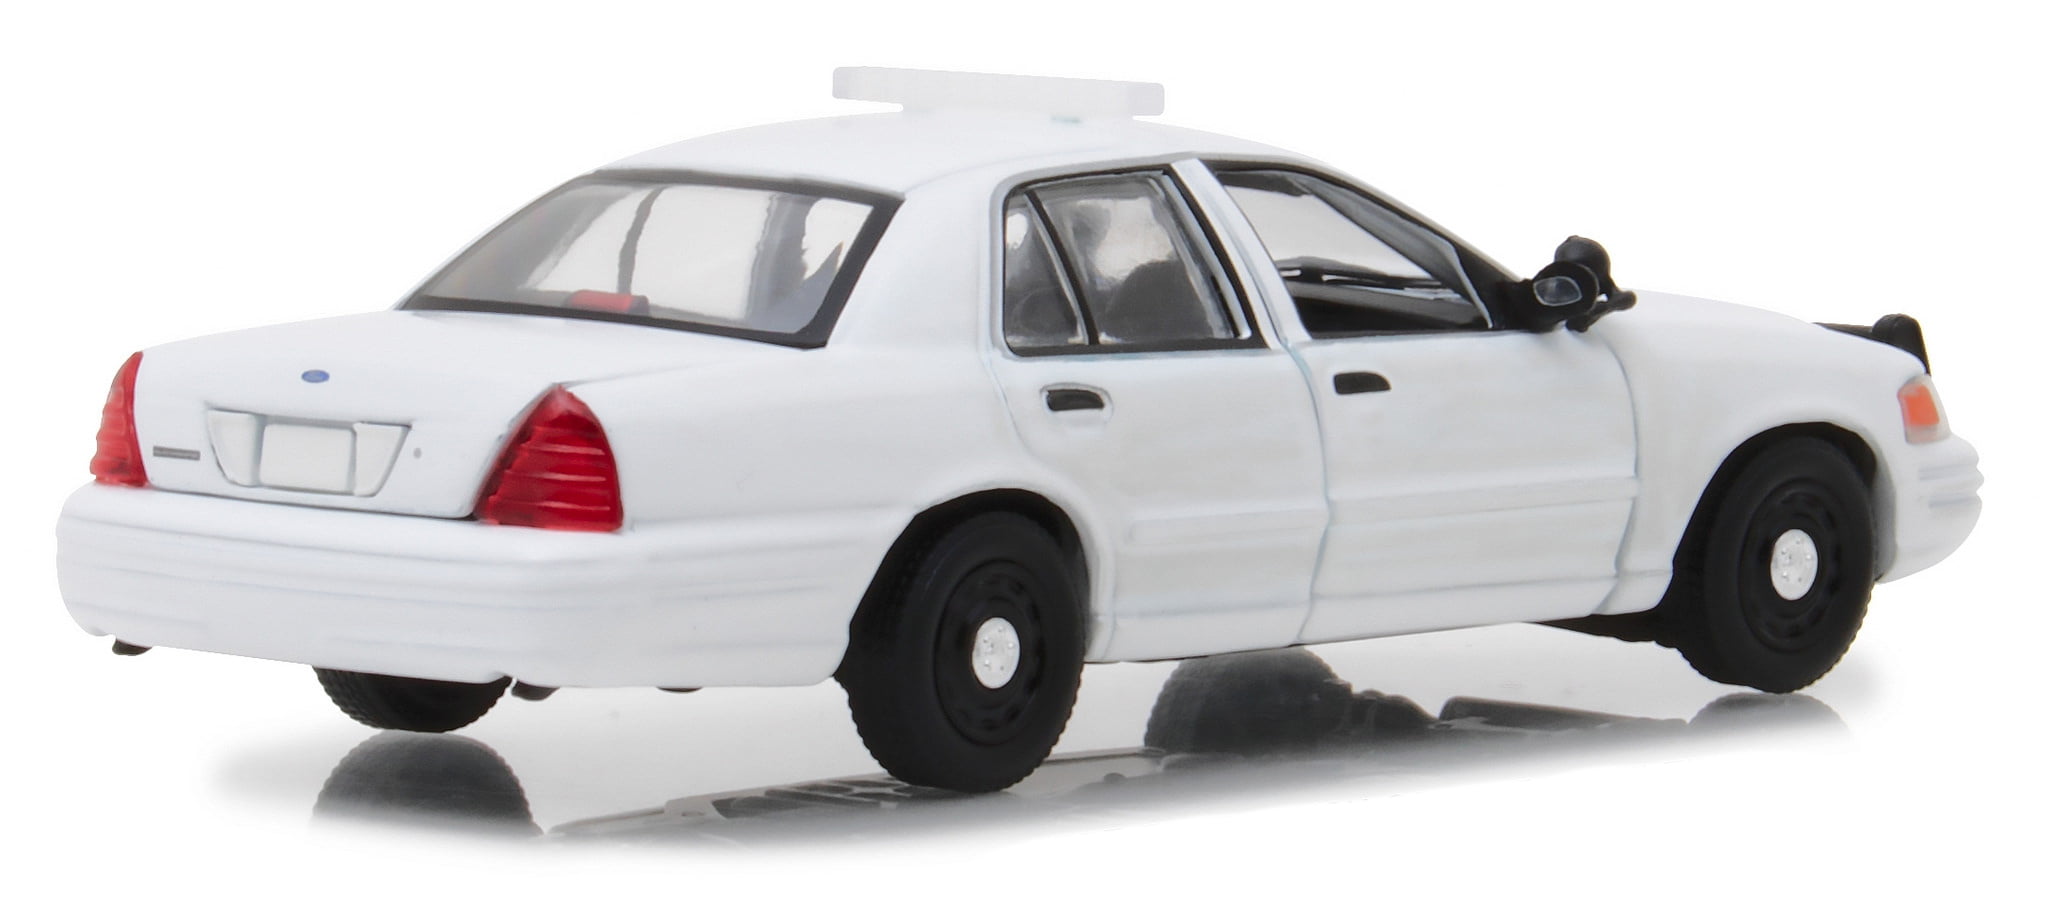 Ford Crown Victoria NYPD Police Interceptor 1998 Year 1/43 Scale Diecast Model 